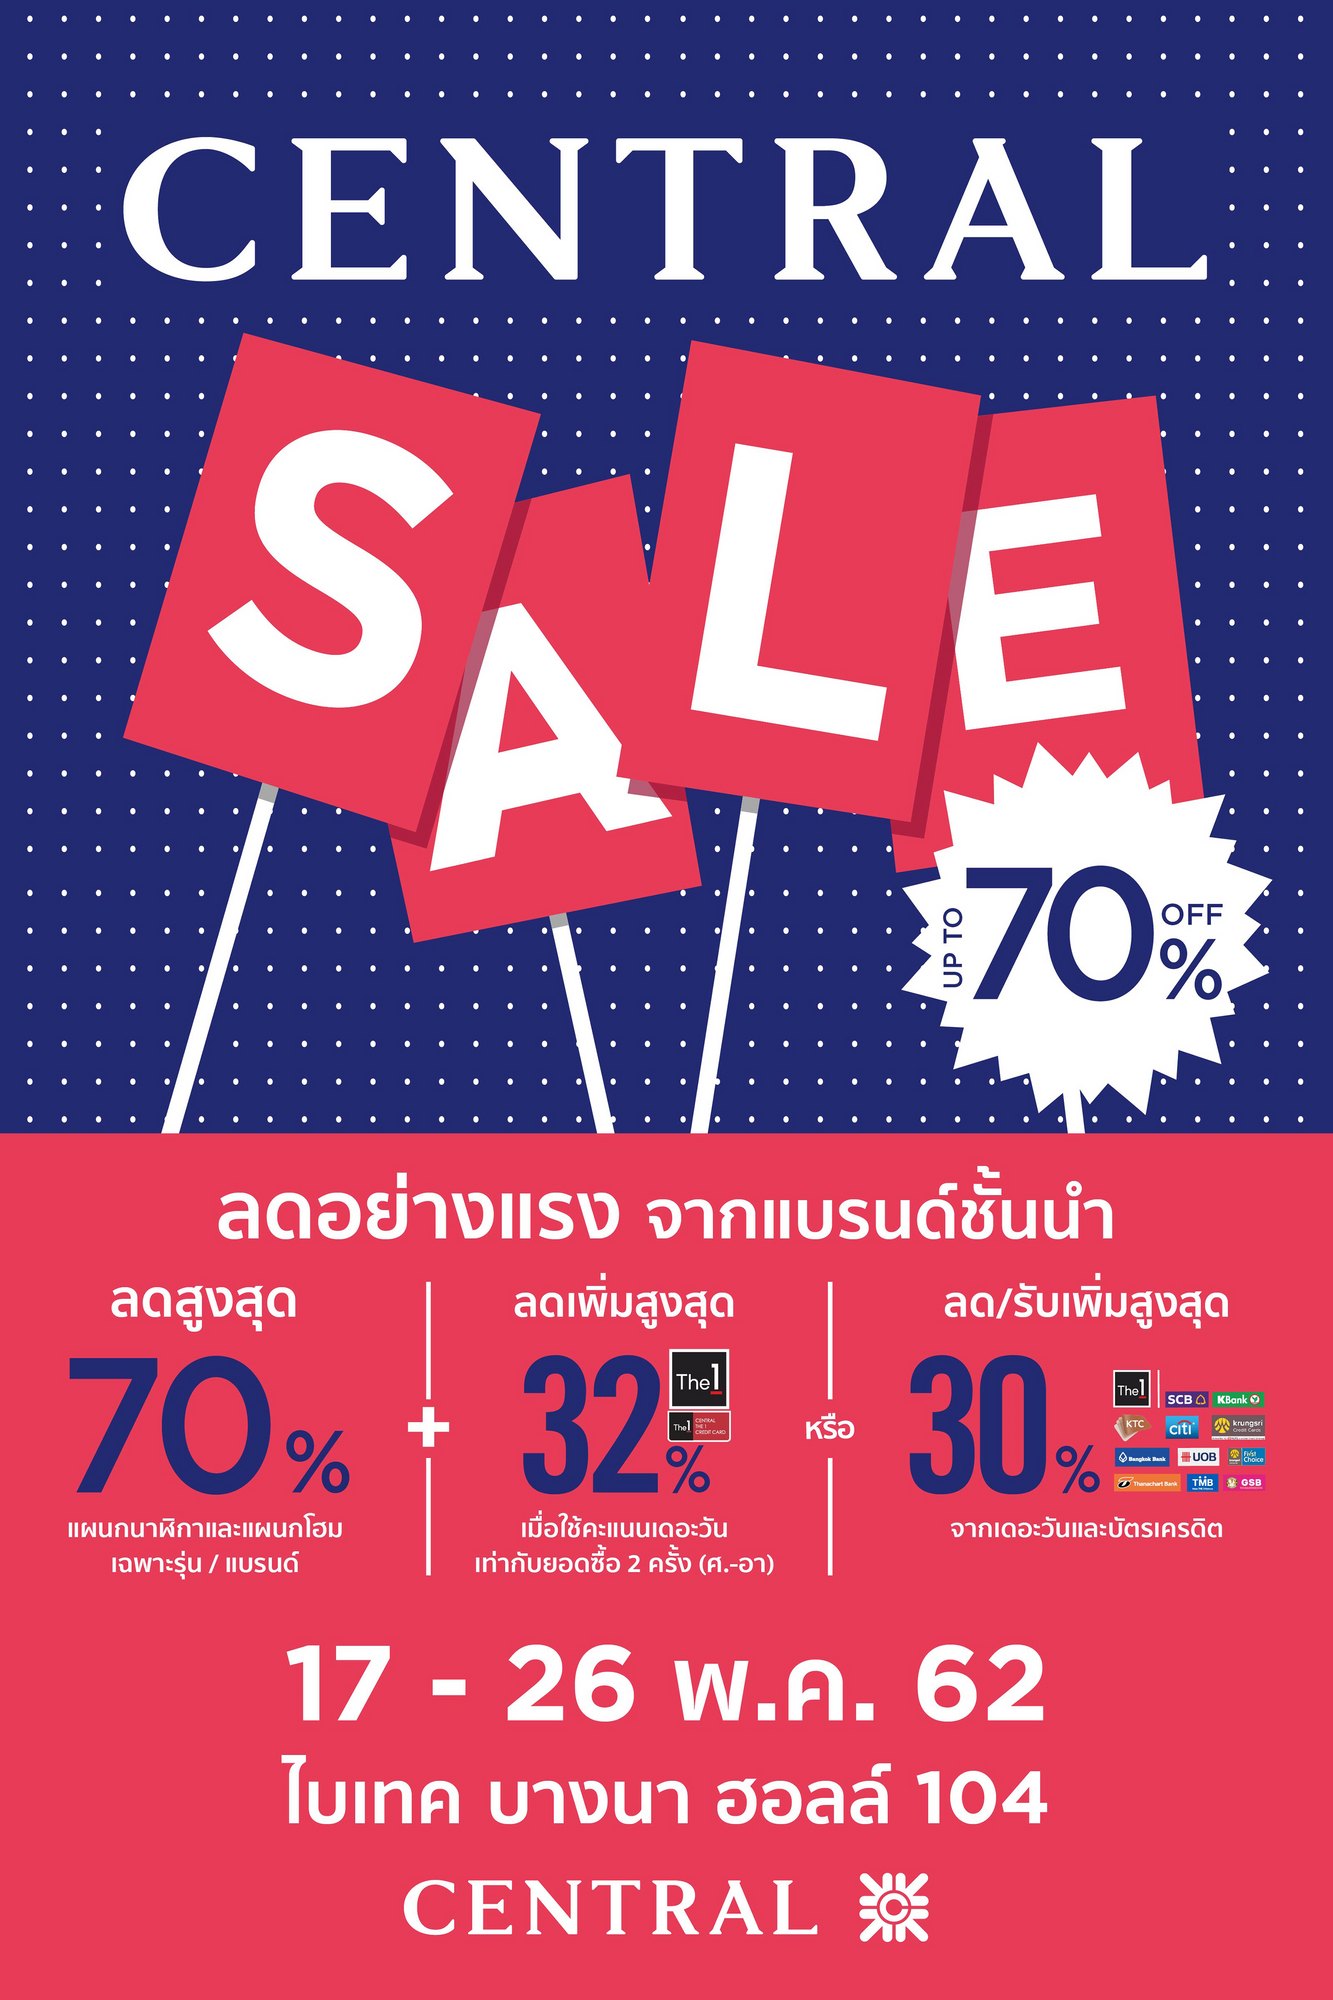 Central sale @Power Buy Expo 2019